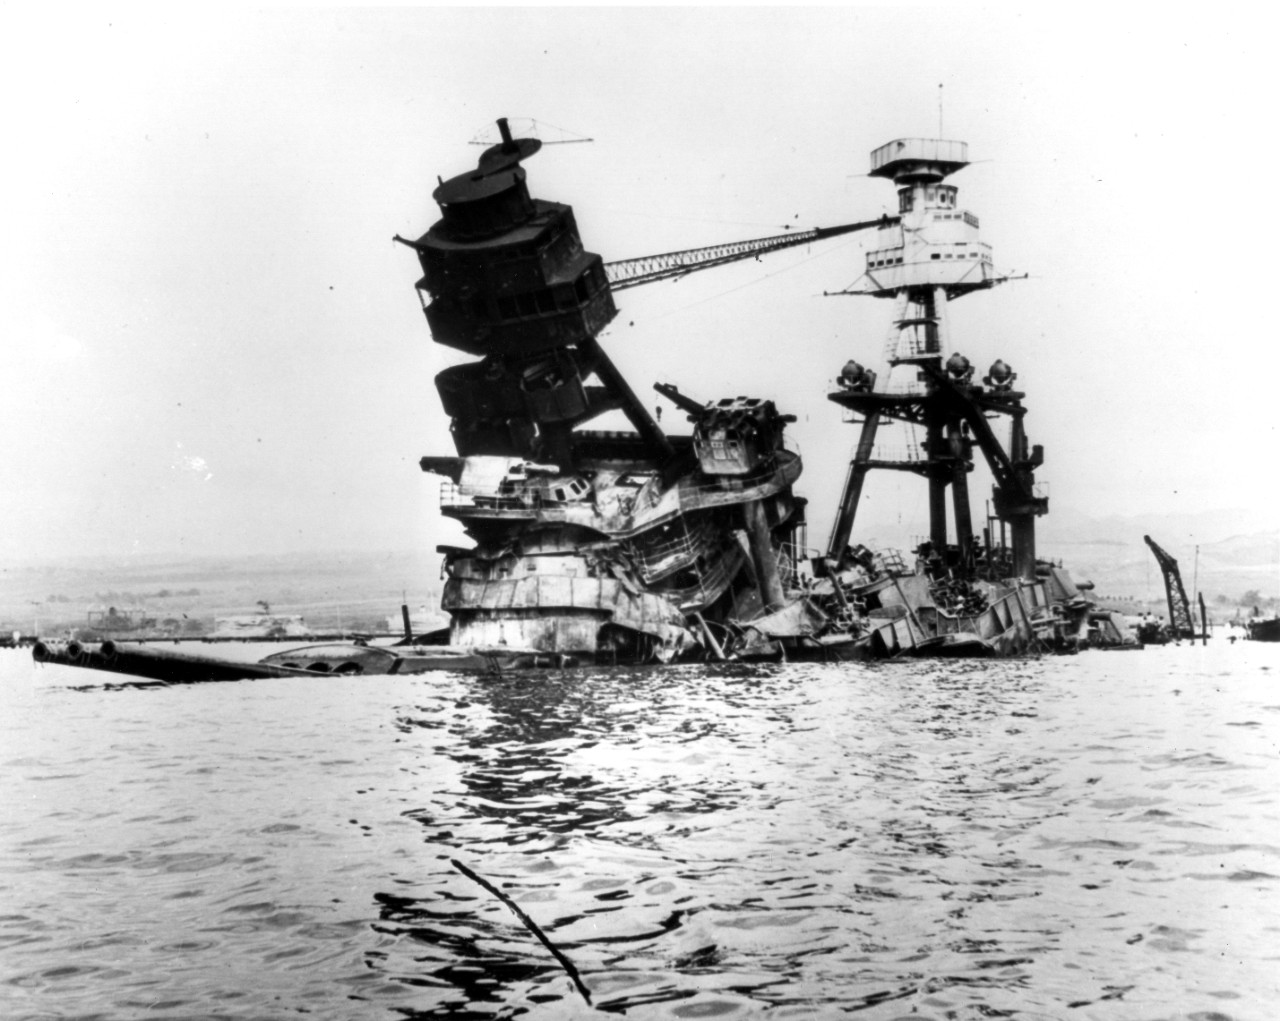 The sunk Arizona after the attack